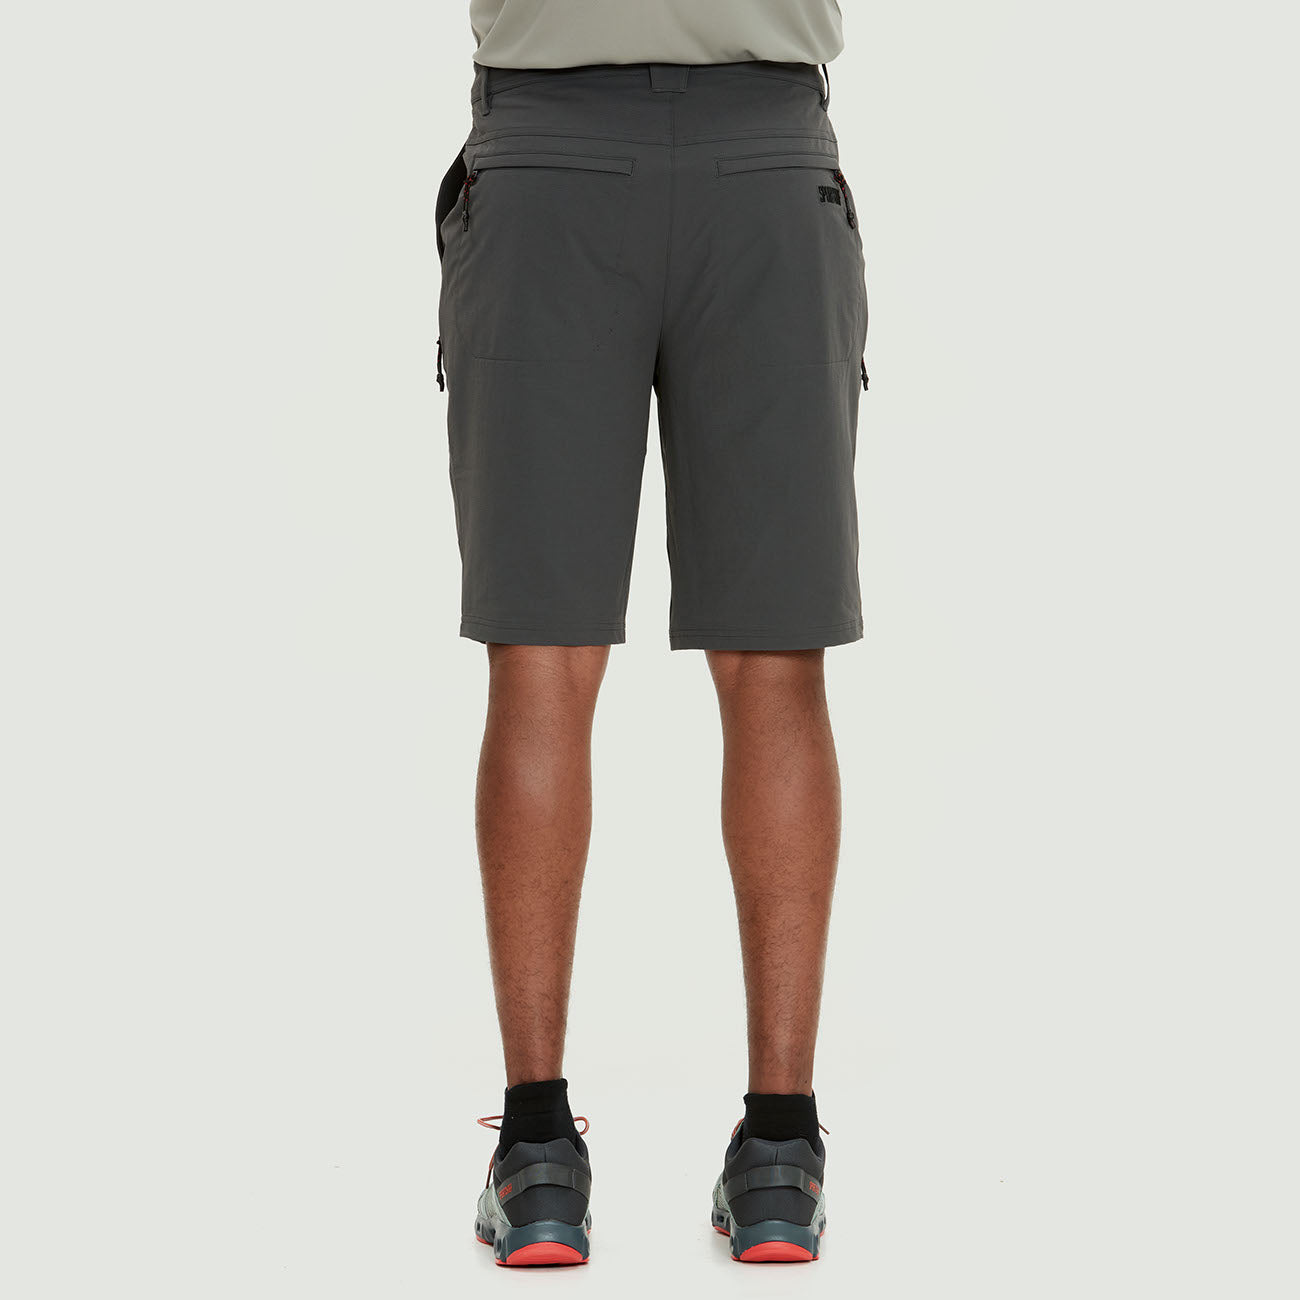 Men's Fraser hiking or fishing shorts – Sportchief